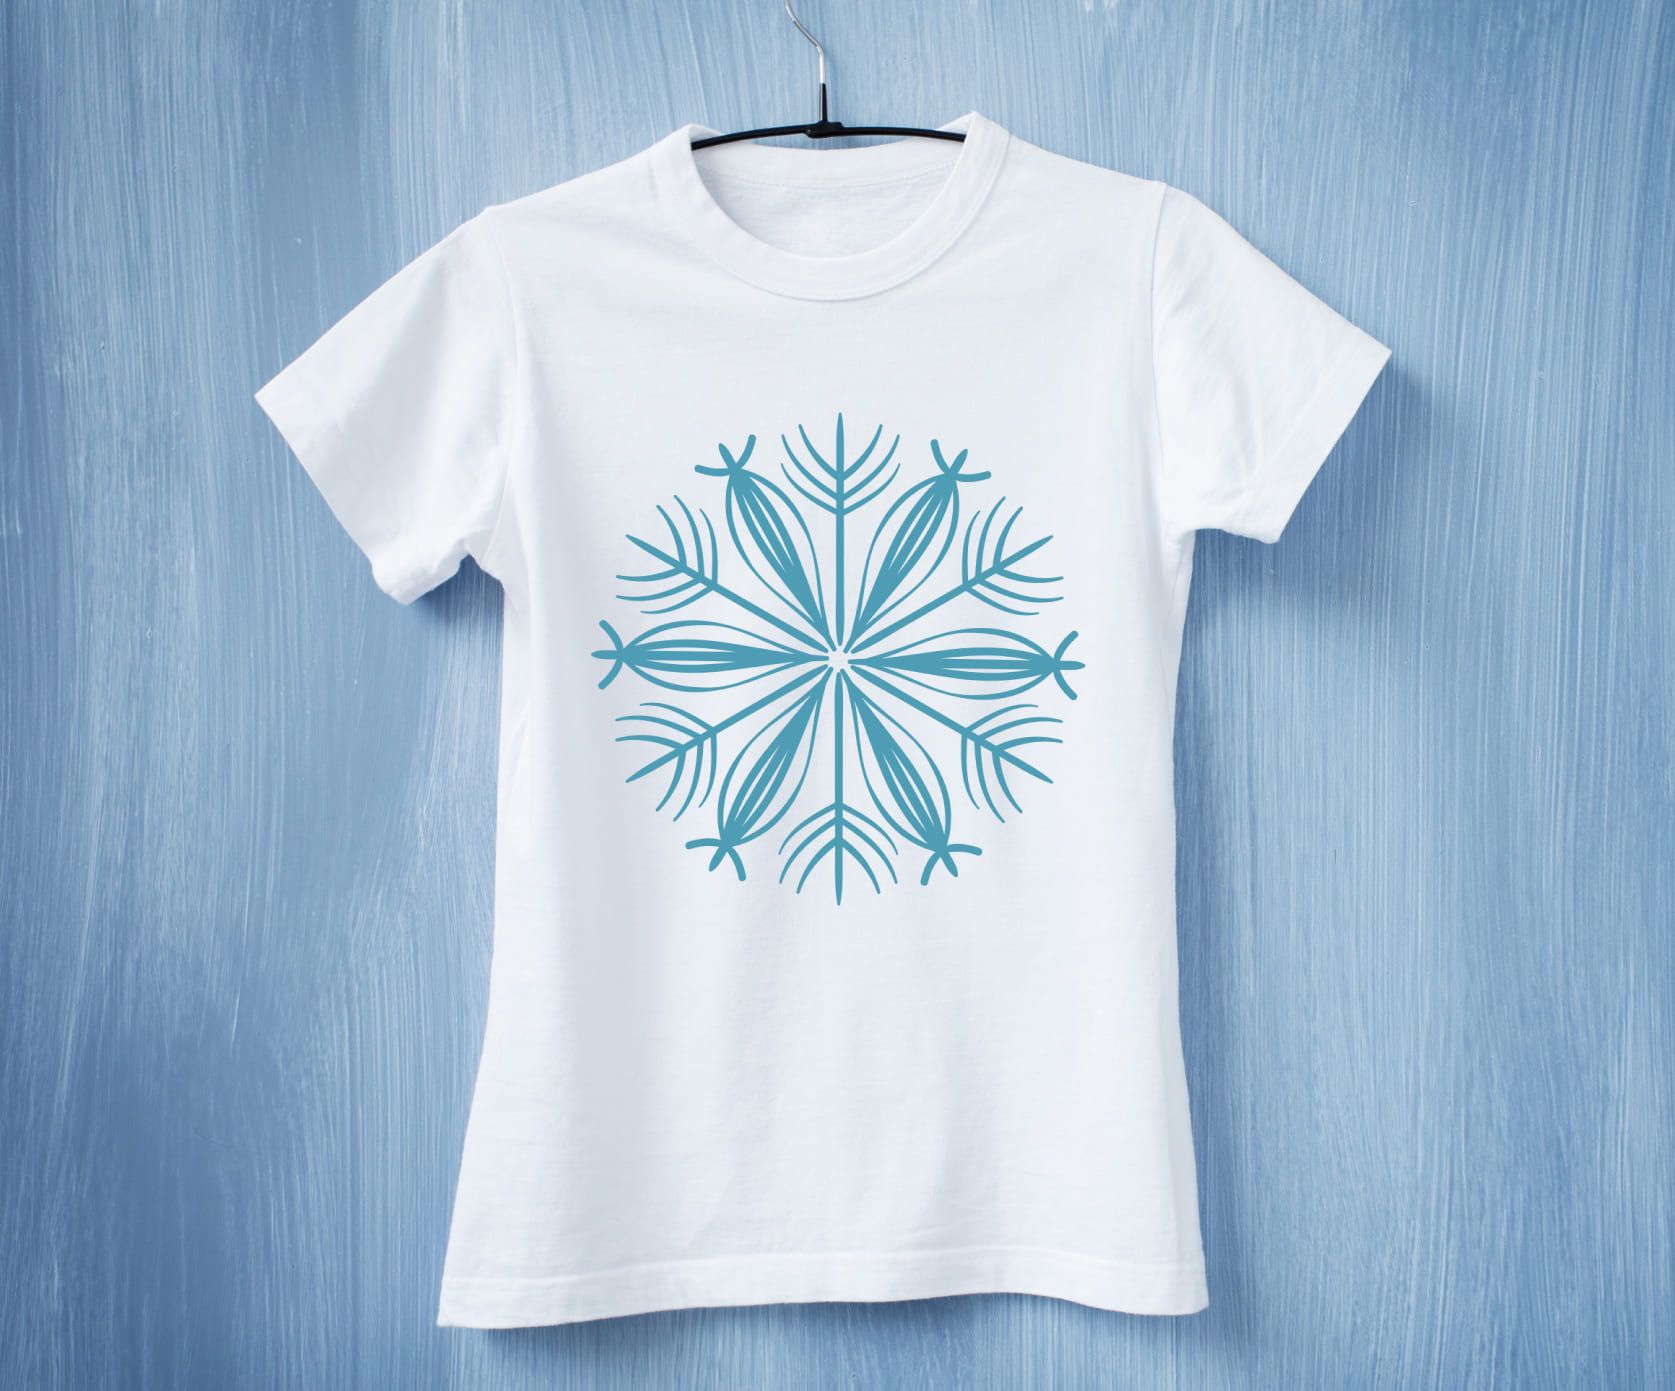 Beautiful and tenderness snowflake on a white t-shirt.